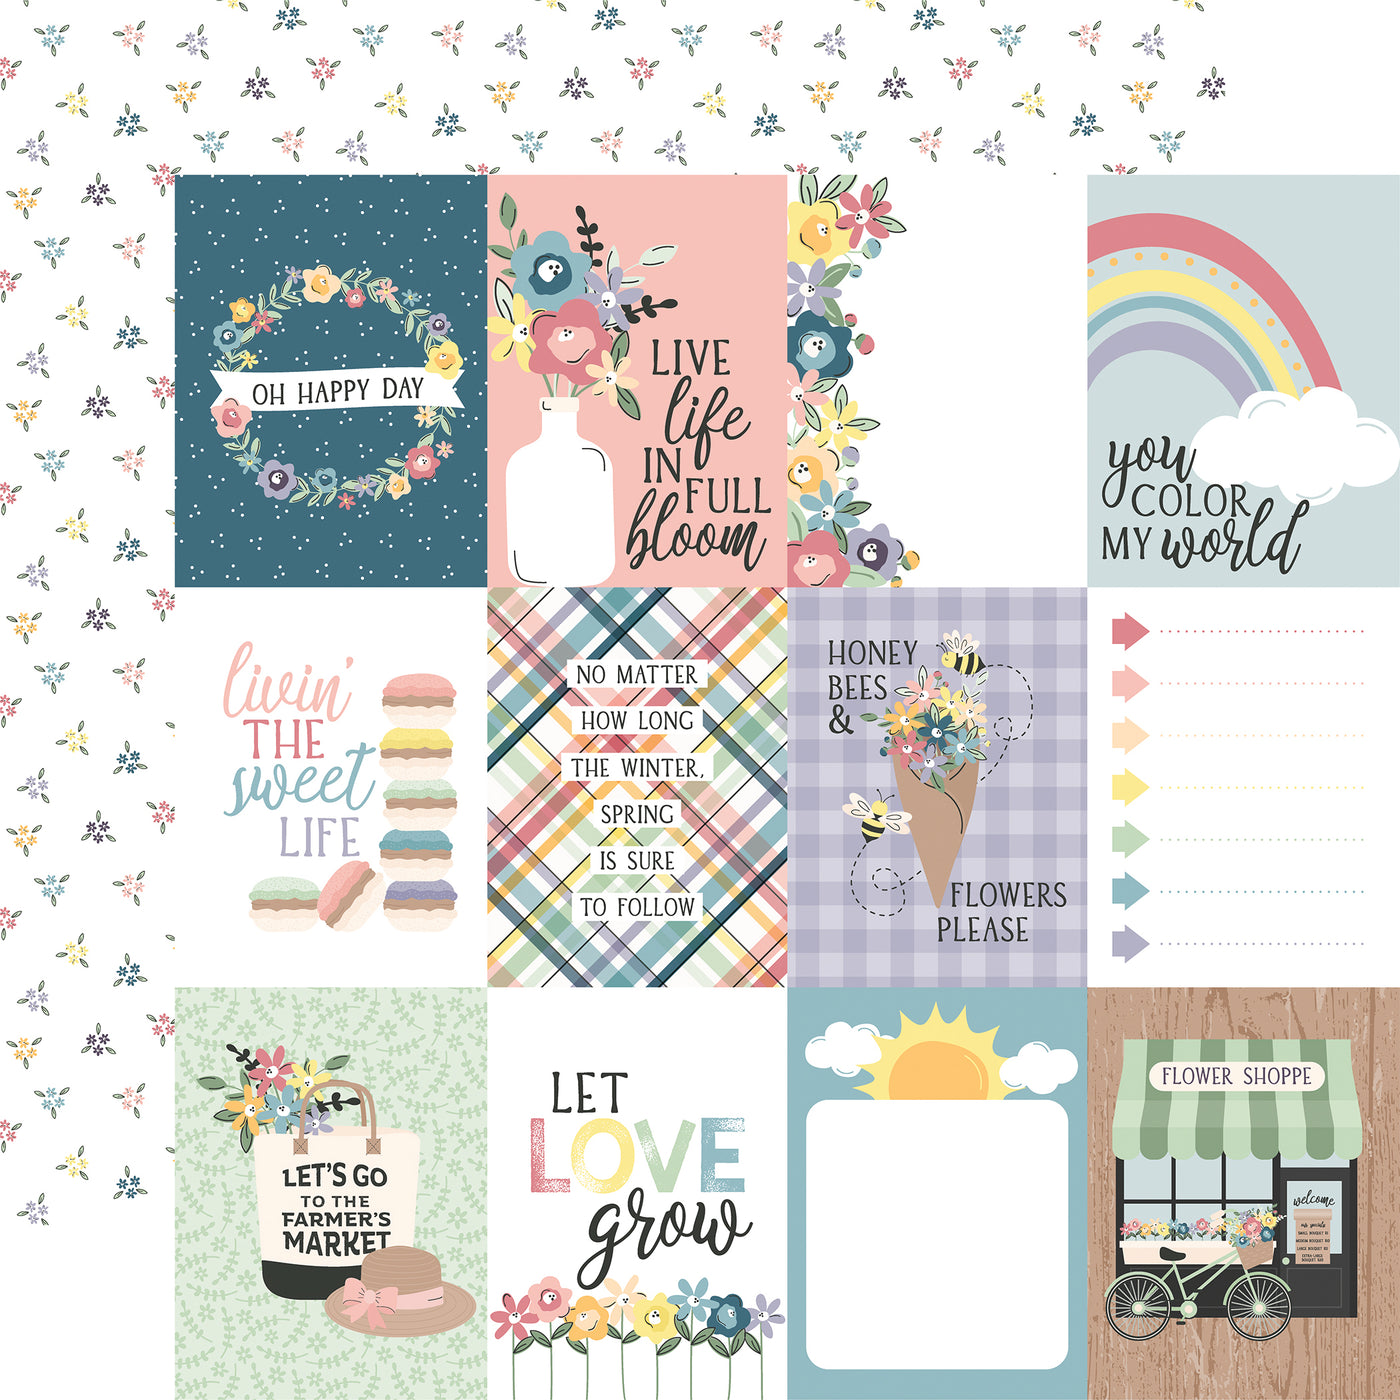 The front side of this paper has twelve 3" x 4" journaling cards which are full of pastel images and words and phrases, plus some room to journal. The reverse side is filled with small groups of flowers in triangle shapes.